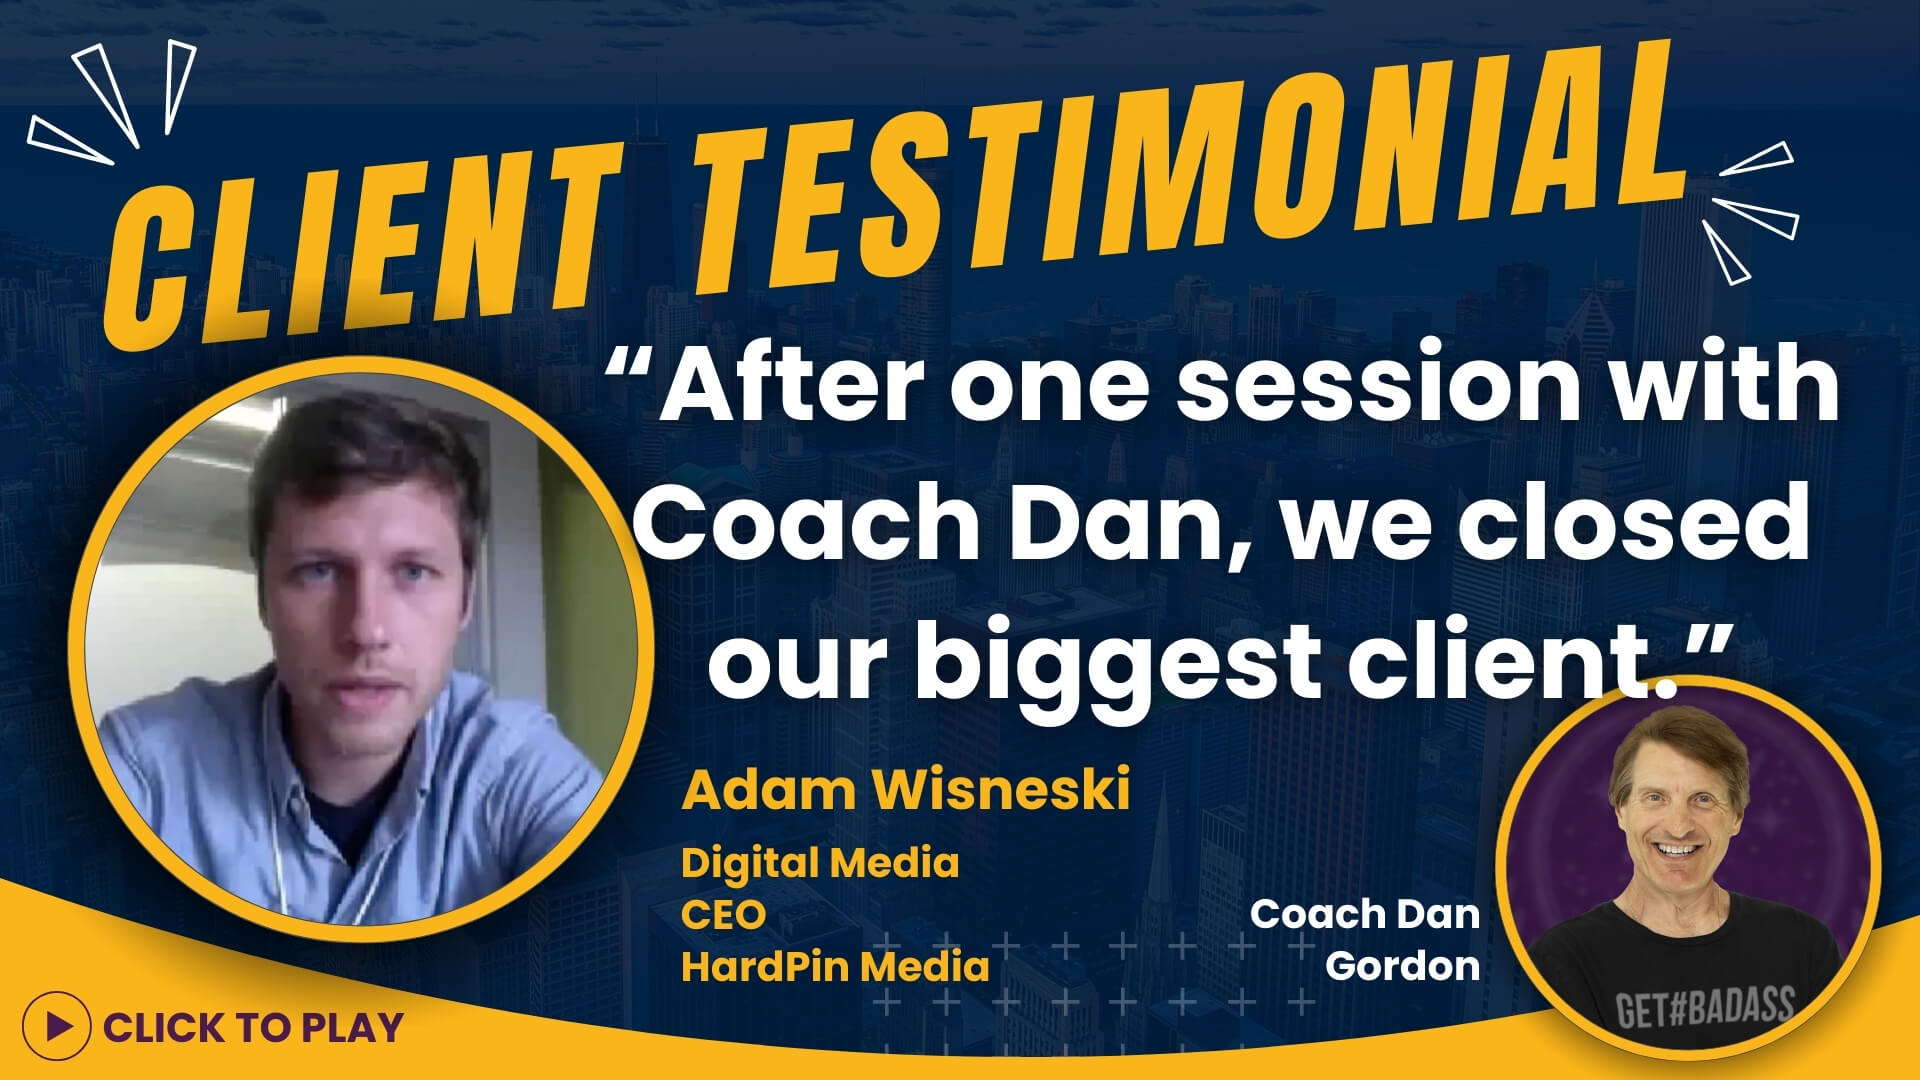 Testimonial from Adam Wisneski, CEO of HardPin Media, praising Coach Dan Gordon for their successful client acquisition after a coaching session, with a 'Click to Play' video button.